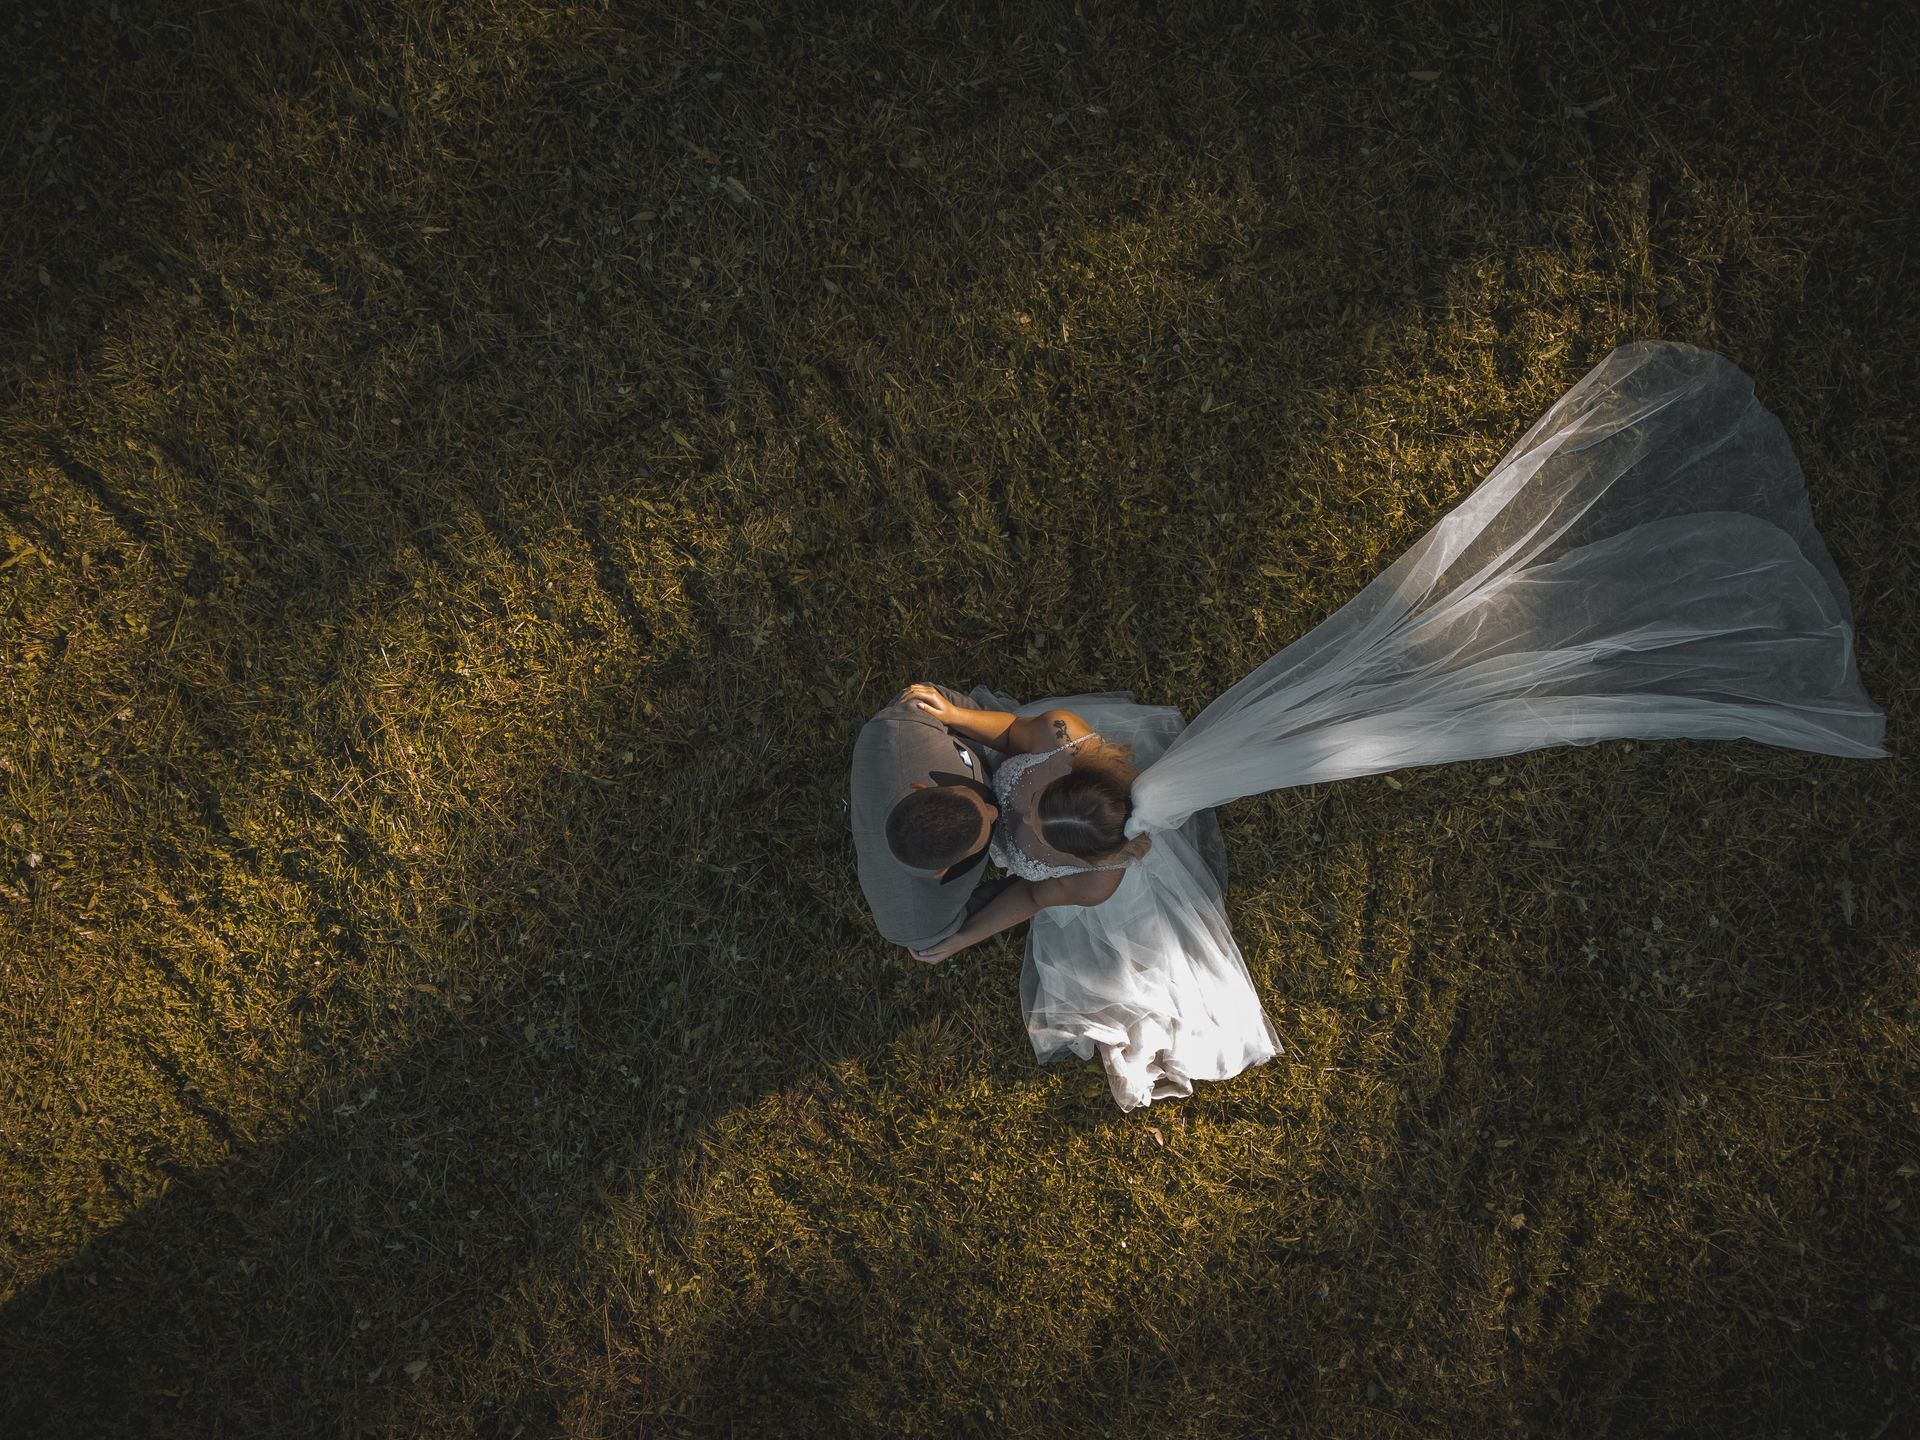 Drone Wedding Photography is performed by Affordable Drone Photography